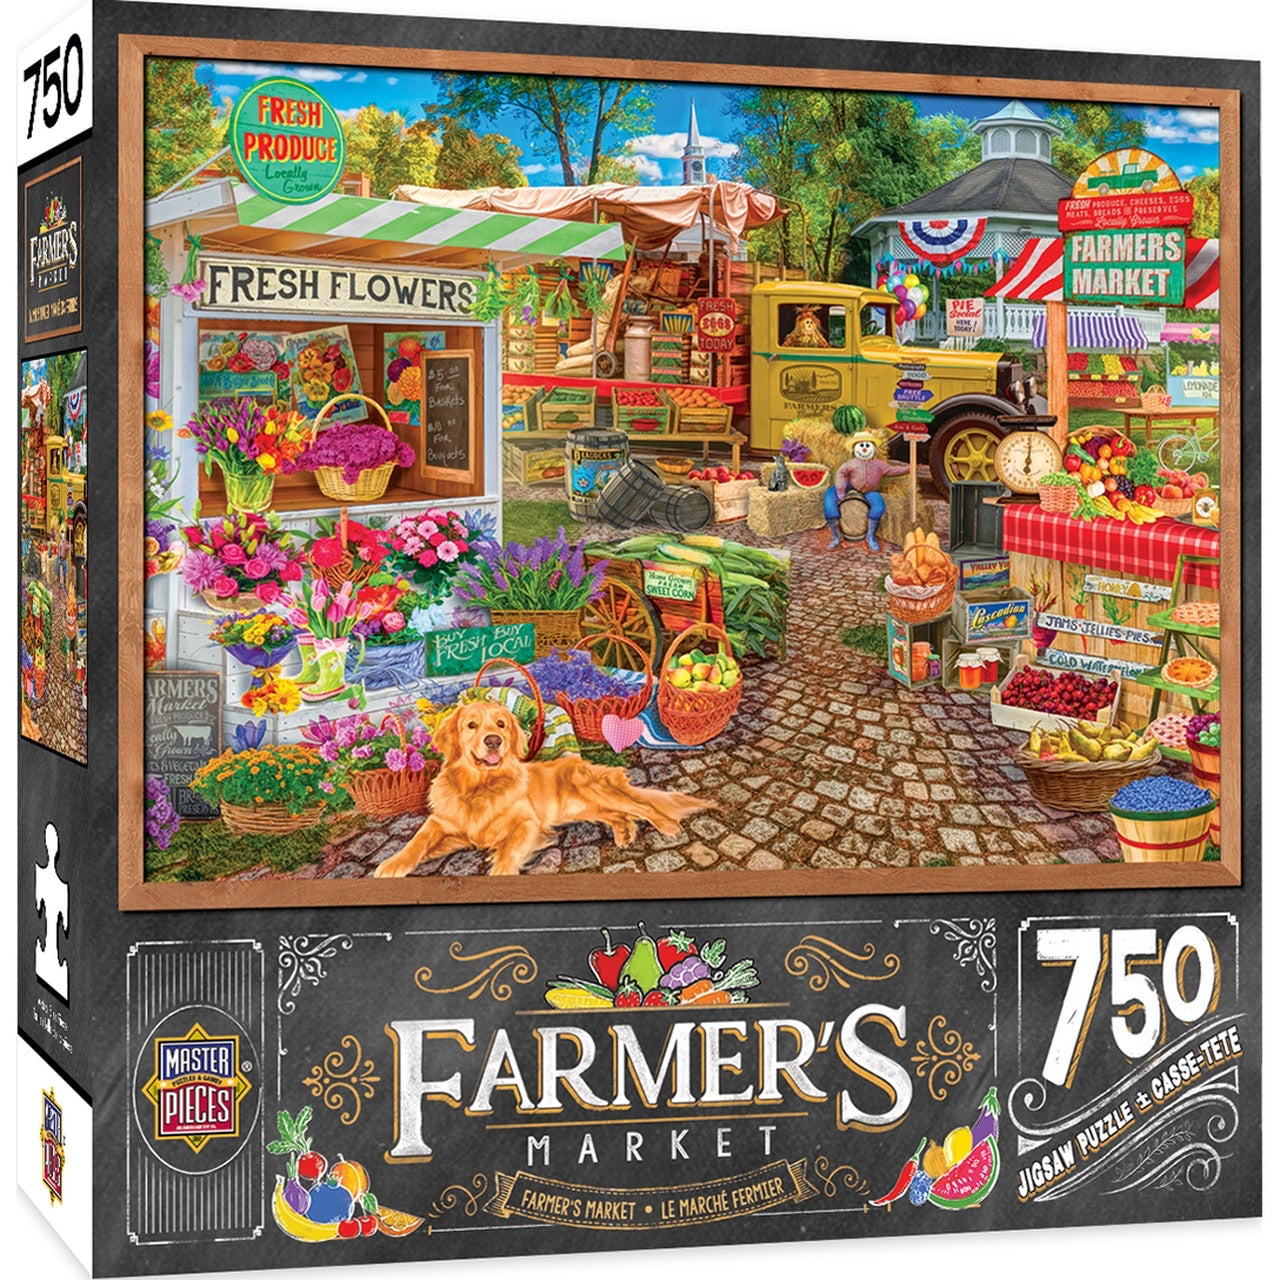 Farmer's Market - Buy Local Honey 750pc Puzzle by Masterpieces #31996